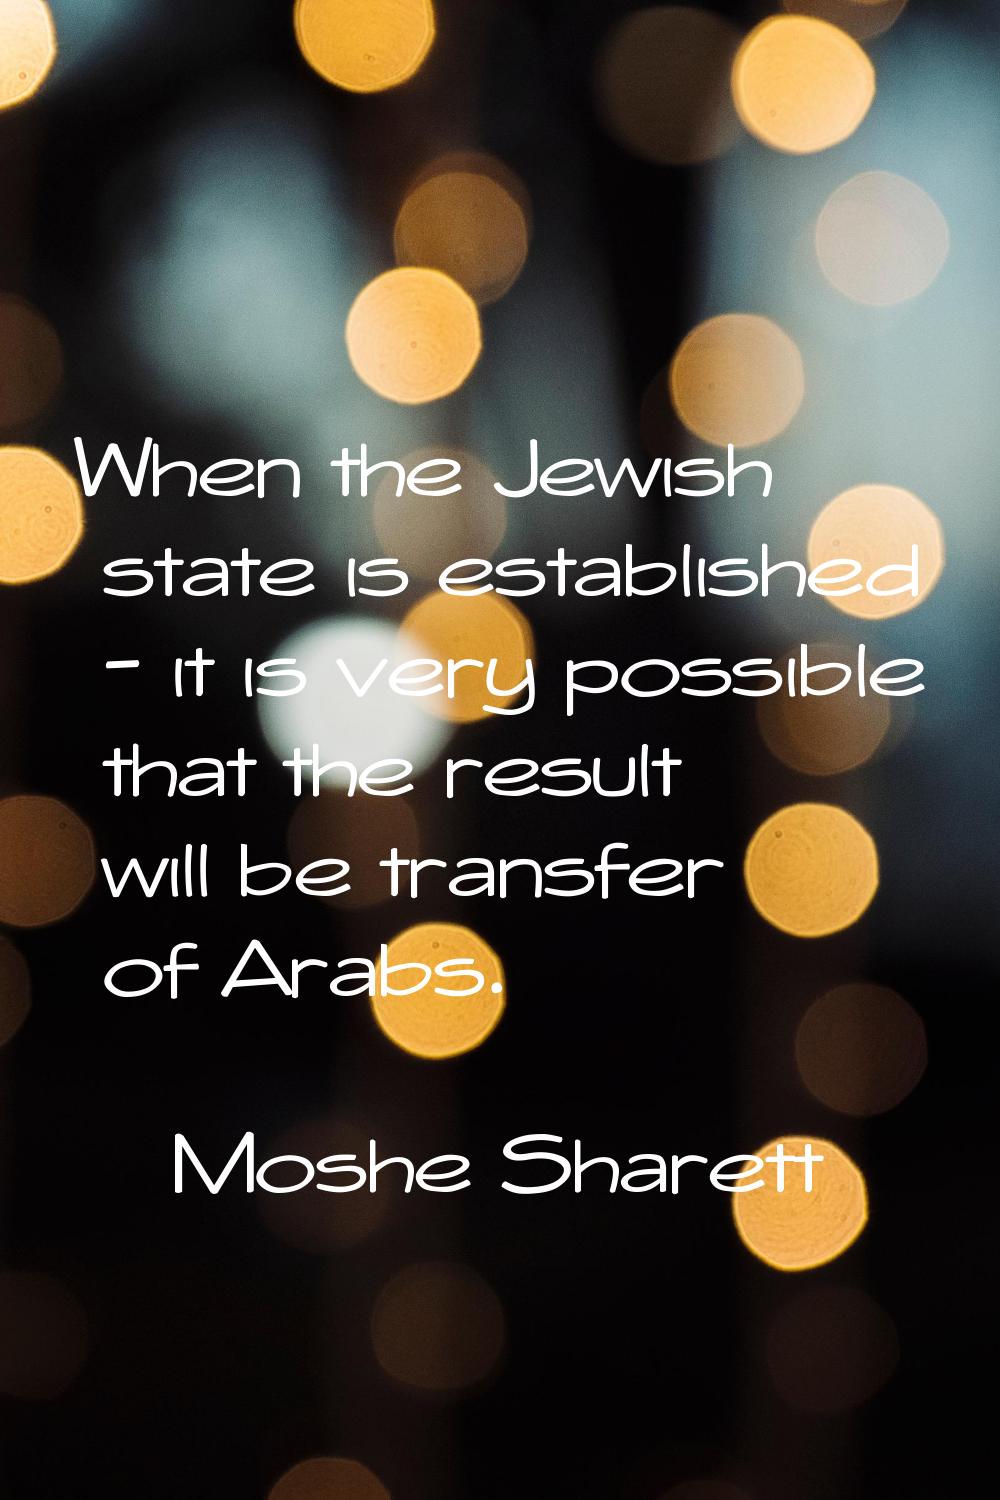 When the Jewish state is established - it is very possible that the result will be transfer of Arab